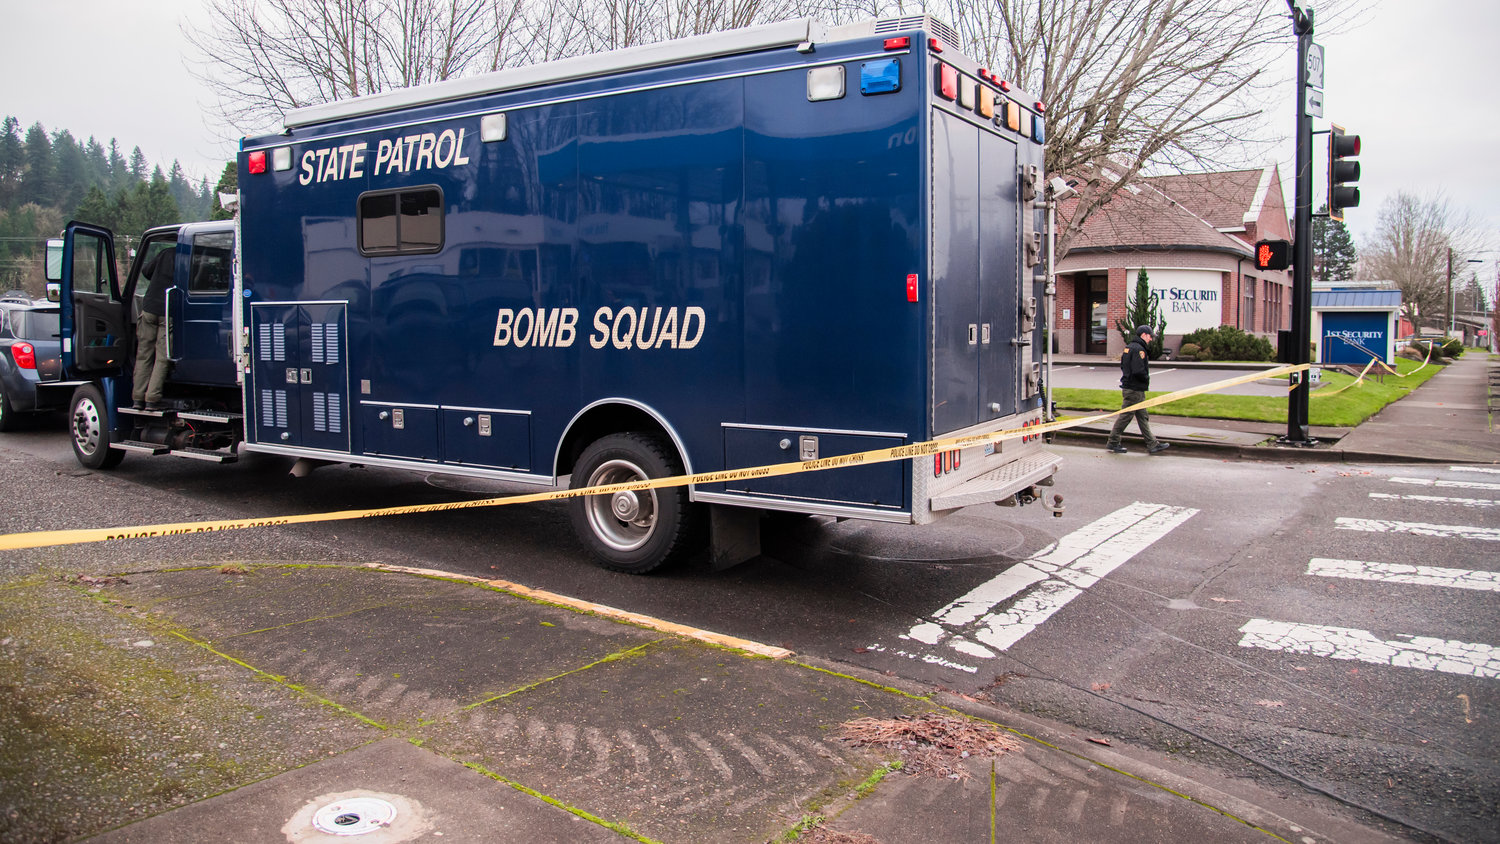 The Washington State Patrol Bomb Squad arrives on the scene at the 1st Security Bank location at 604 South Tower Avenue in Centralia after reports of an explosion in the area last month.